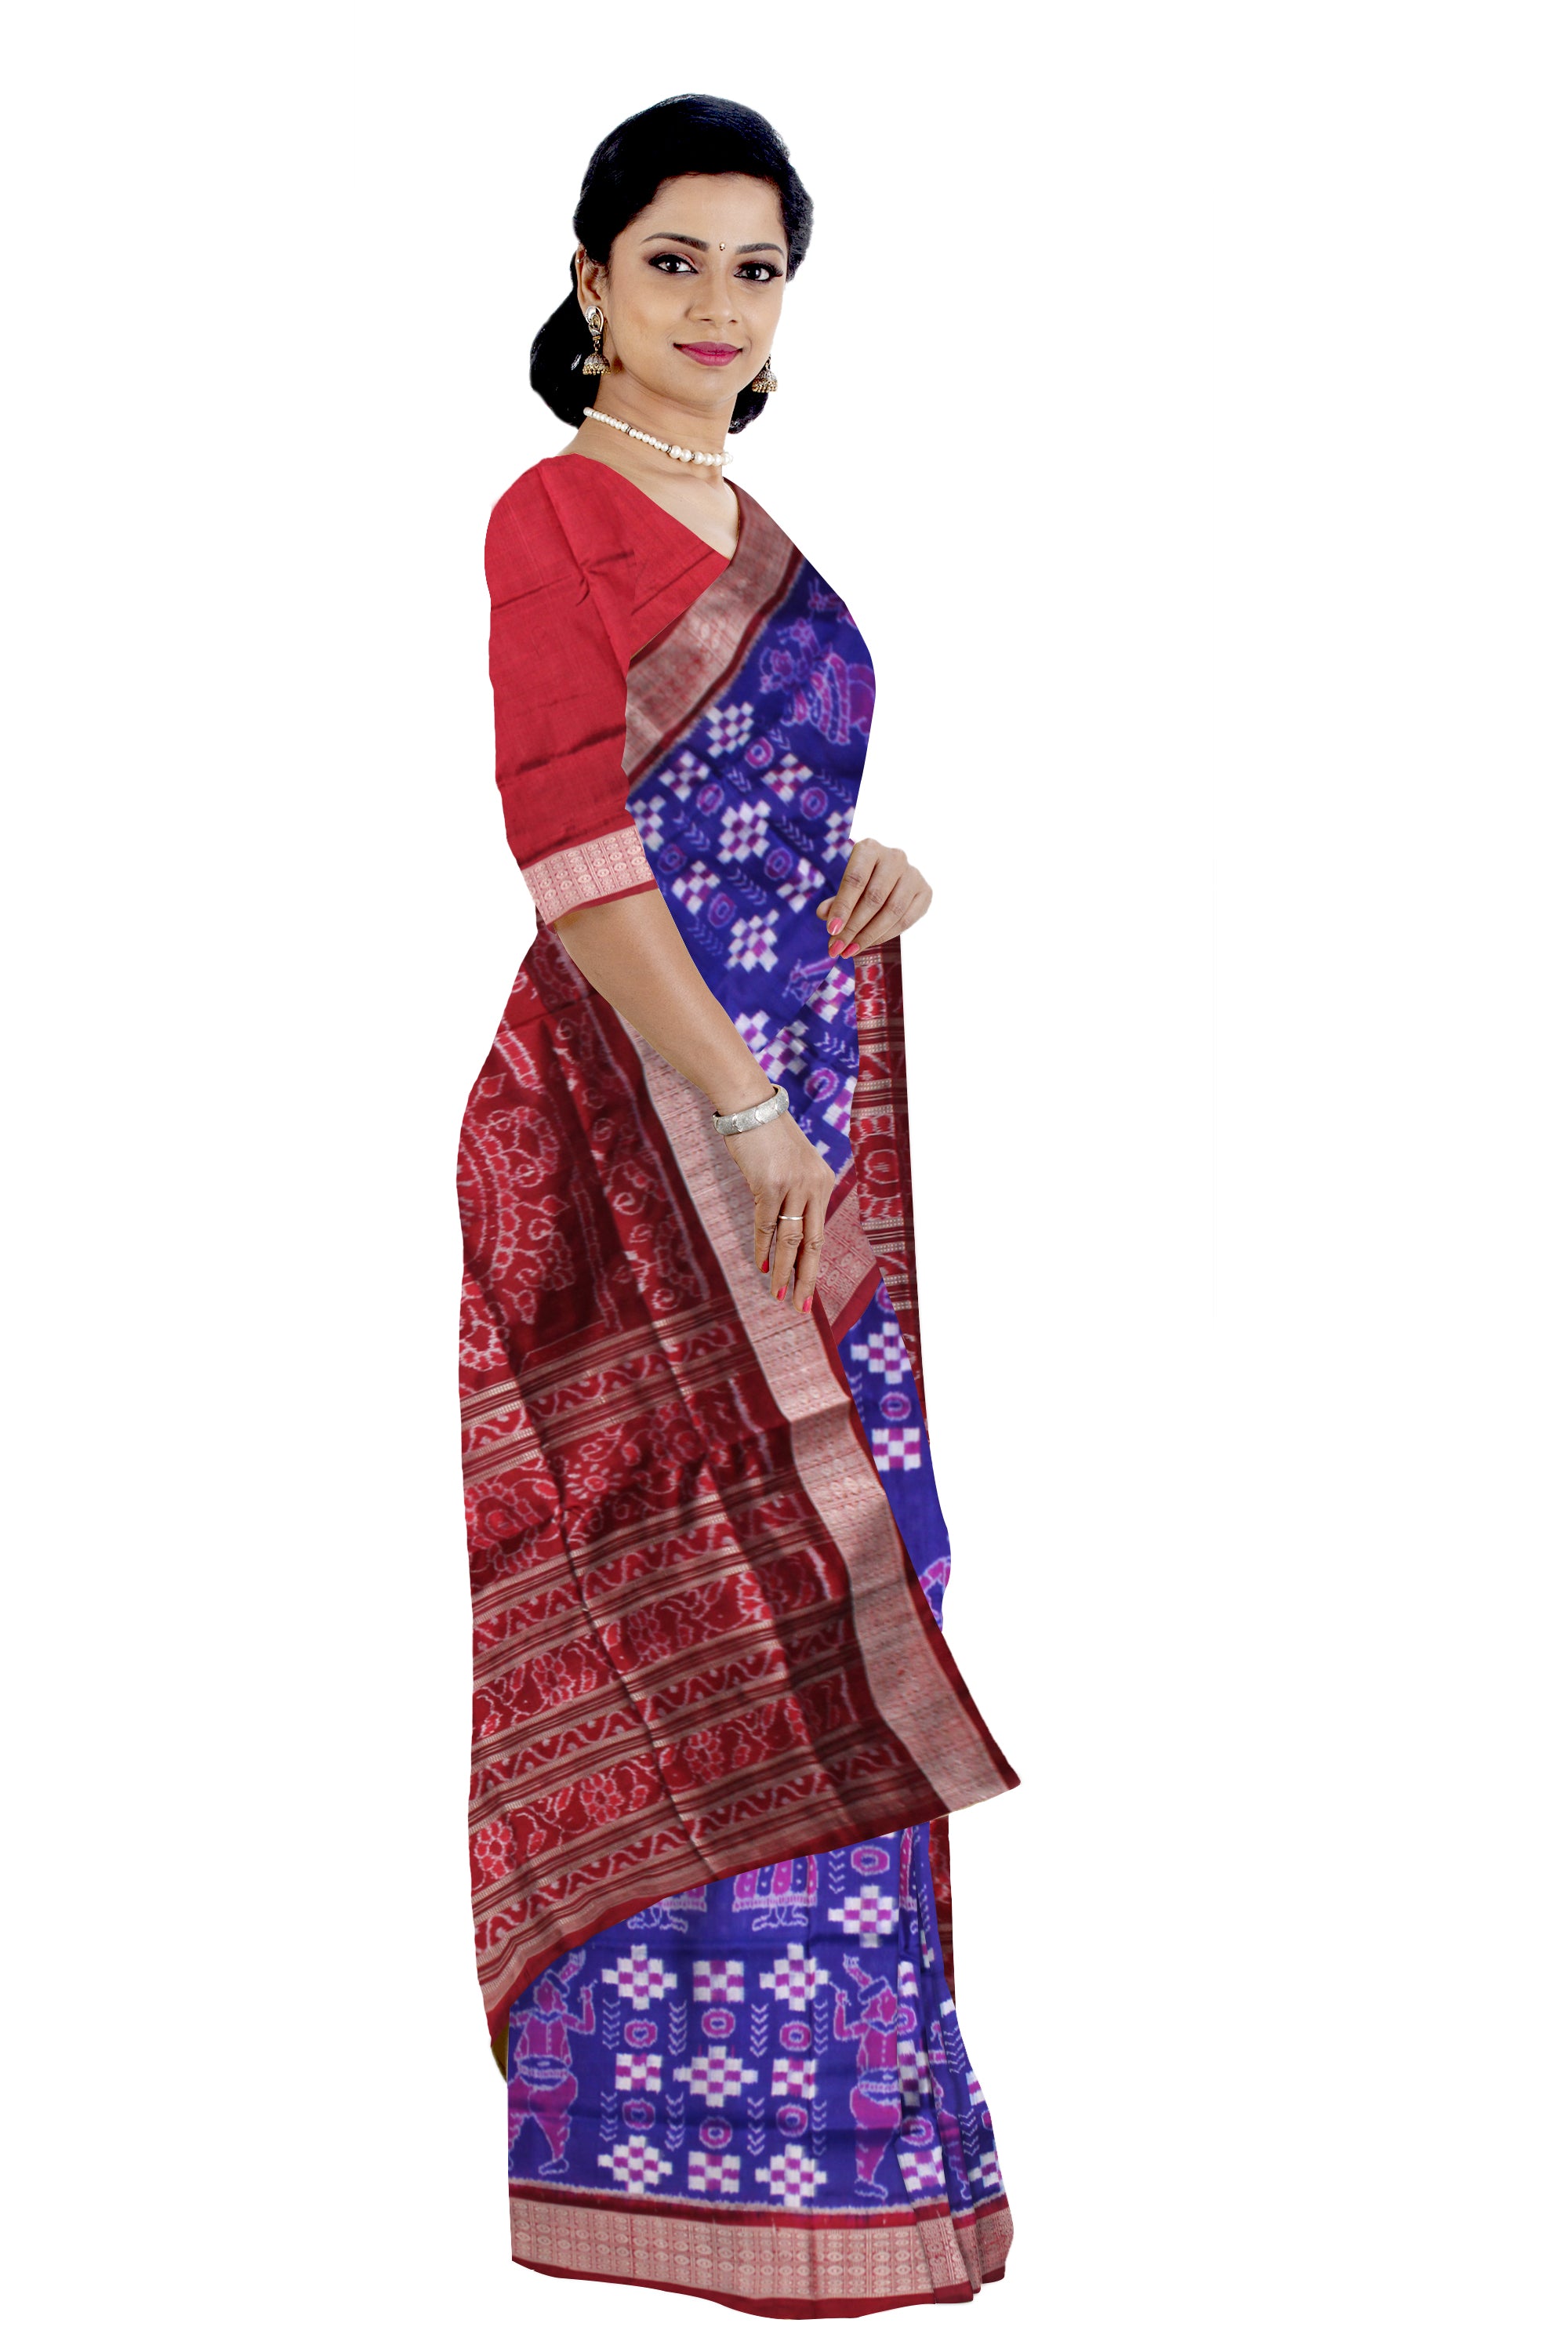 LATEST DESIGN  NARTAKI  WITH PASAPALI PATTERN PURE SILK SAREE IS BLUE AND MAROON COLOR BASE,AVAILABLE WITH MATCHING BLOUSE PIECE. - Koshali Arts & Crafts Enterprise